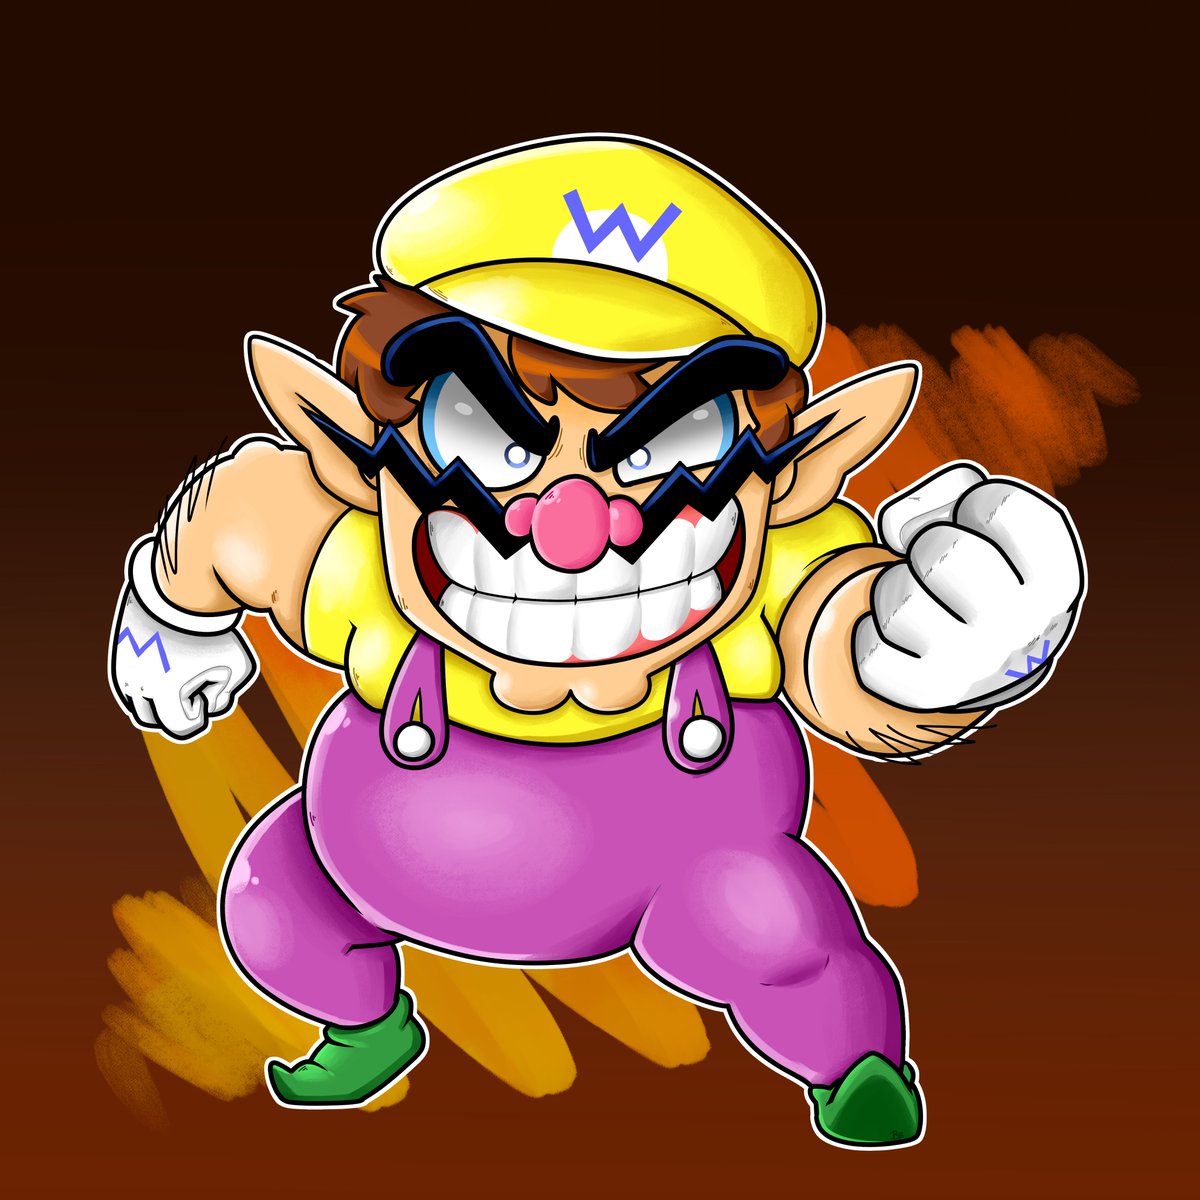 「i dont remember posting this wario 」|🐝Benny Bee🐝のイラスト